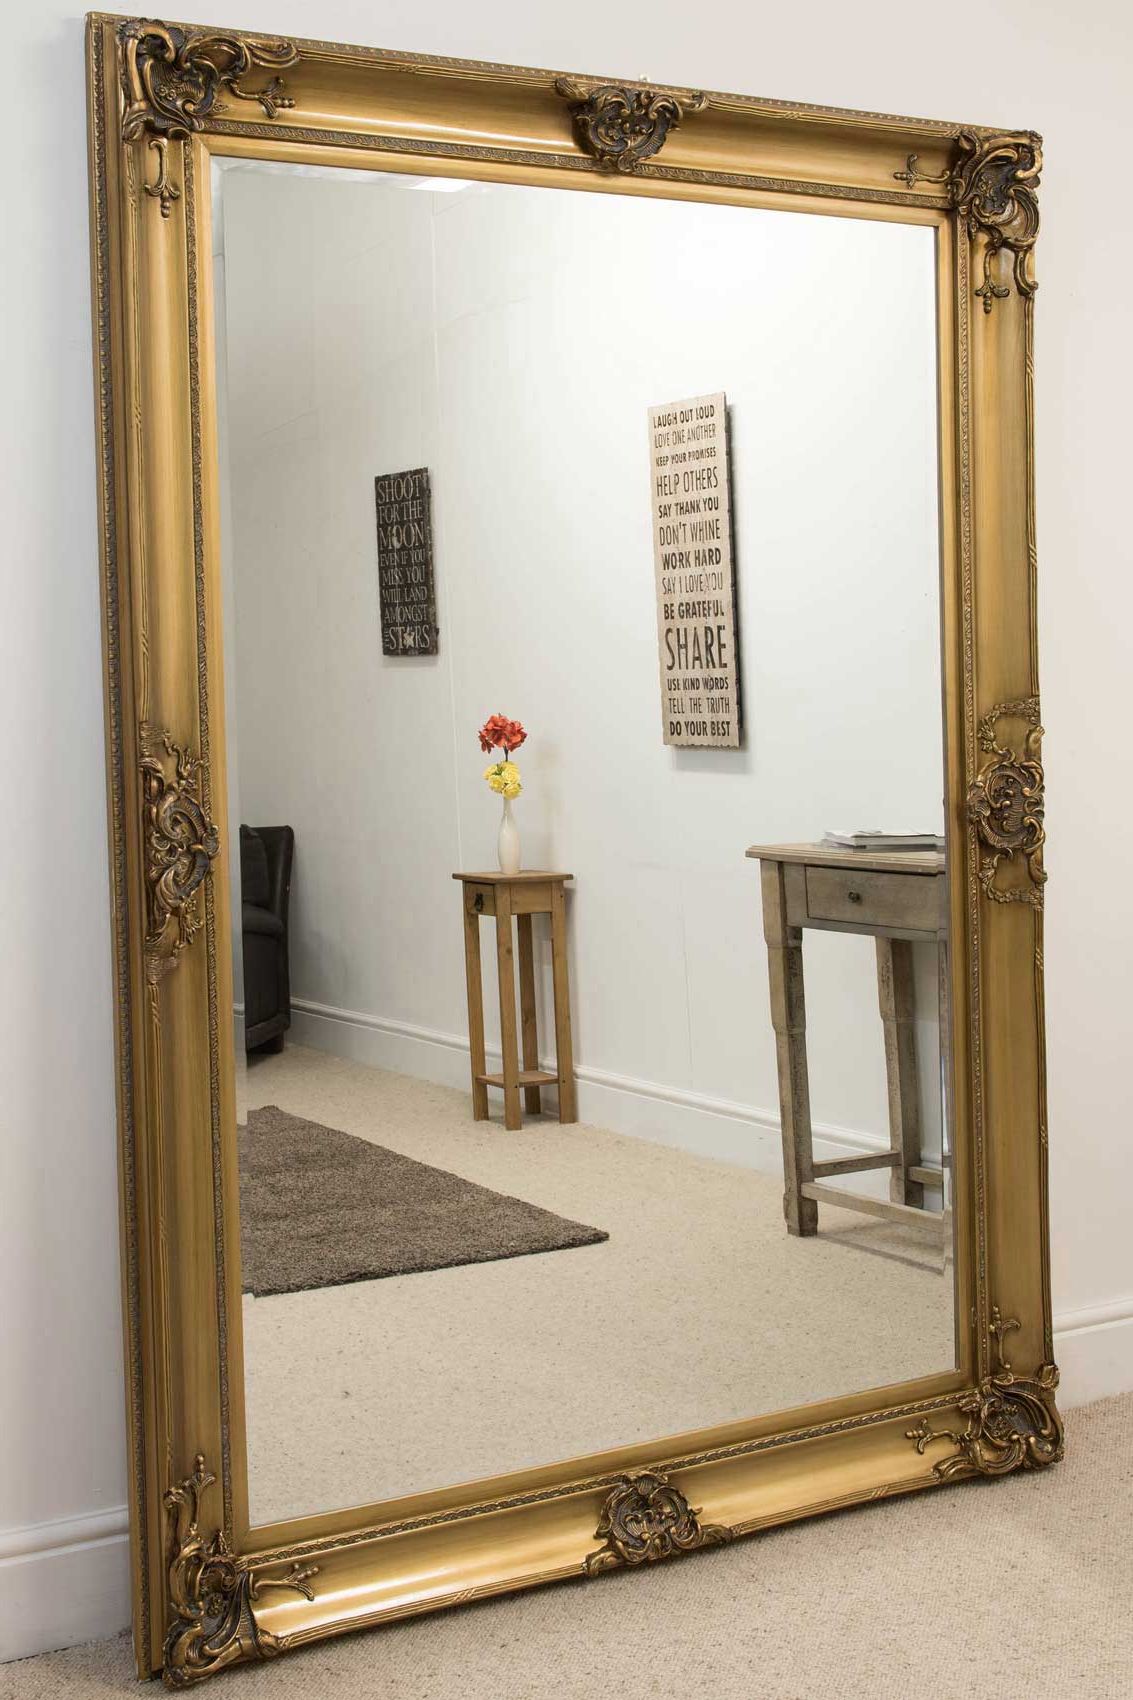 Most Recent Large Gold Decorative Ornate Wall Mirror 7ft X 5ft (213 X 152cm Throughout Gold Square Oversized Wall Mirrors (View 14 of 15)